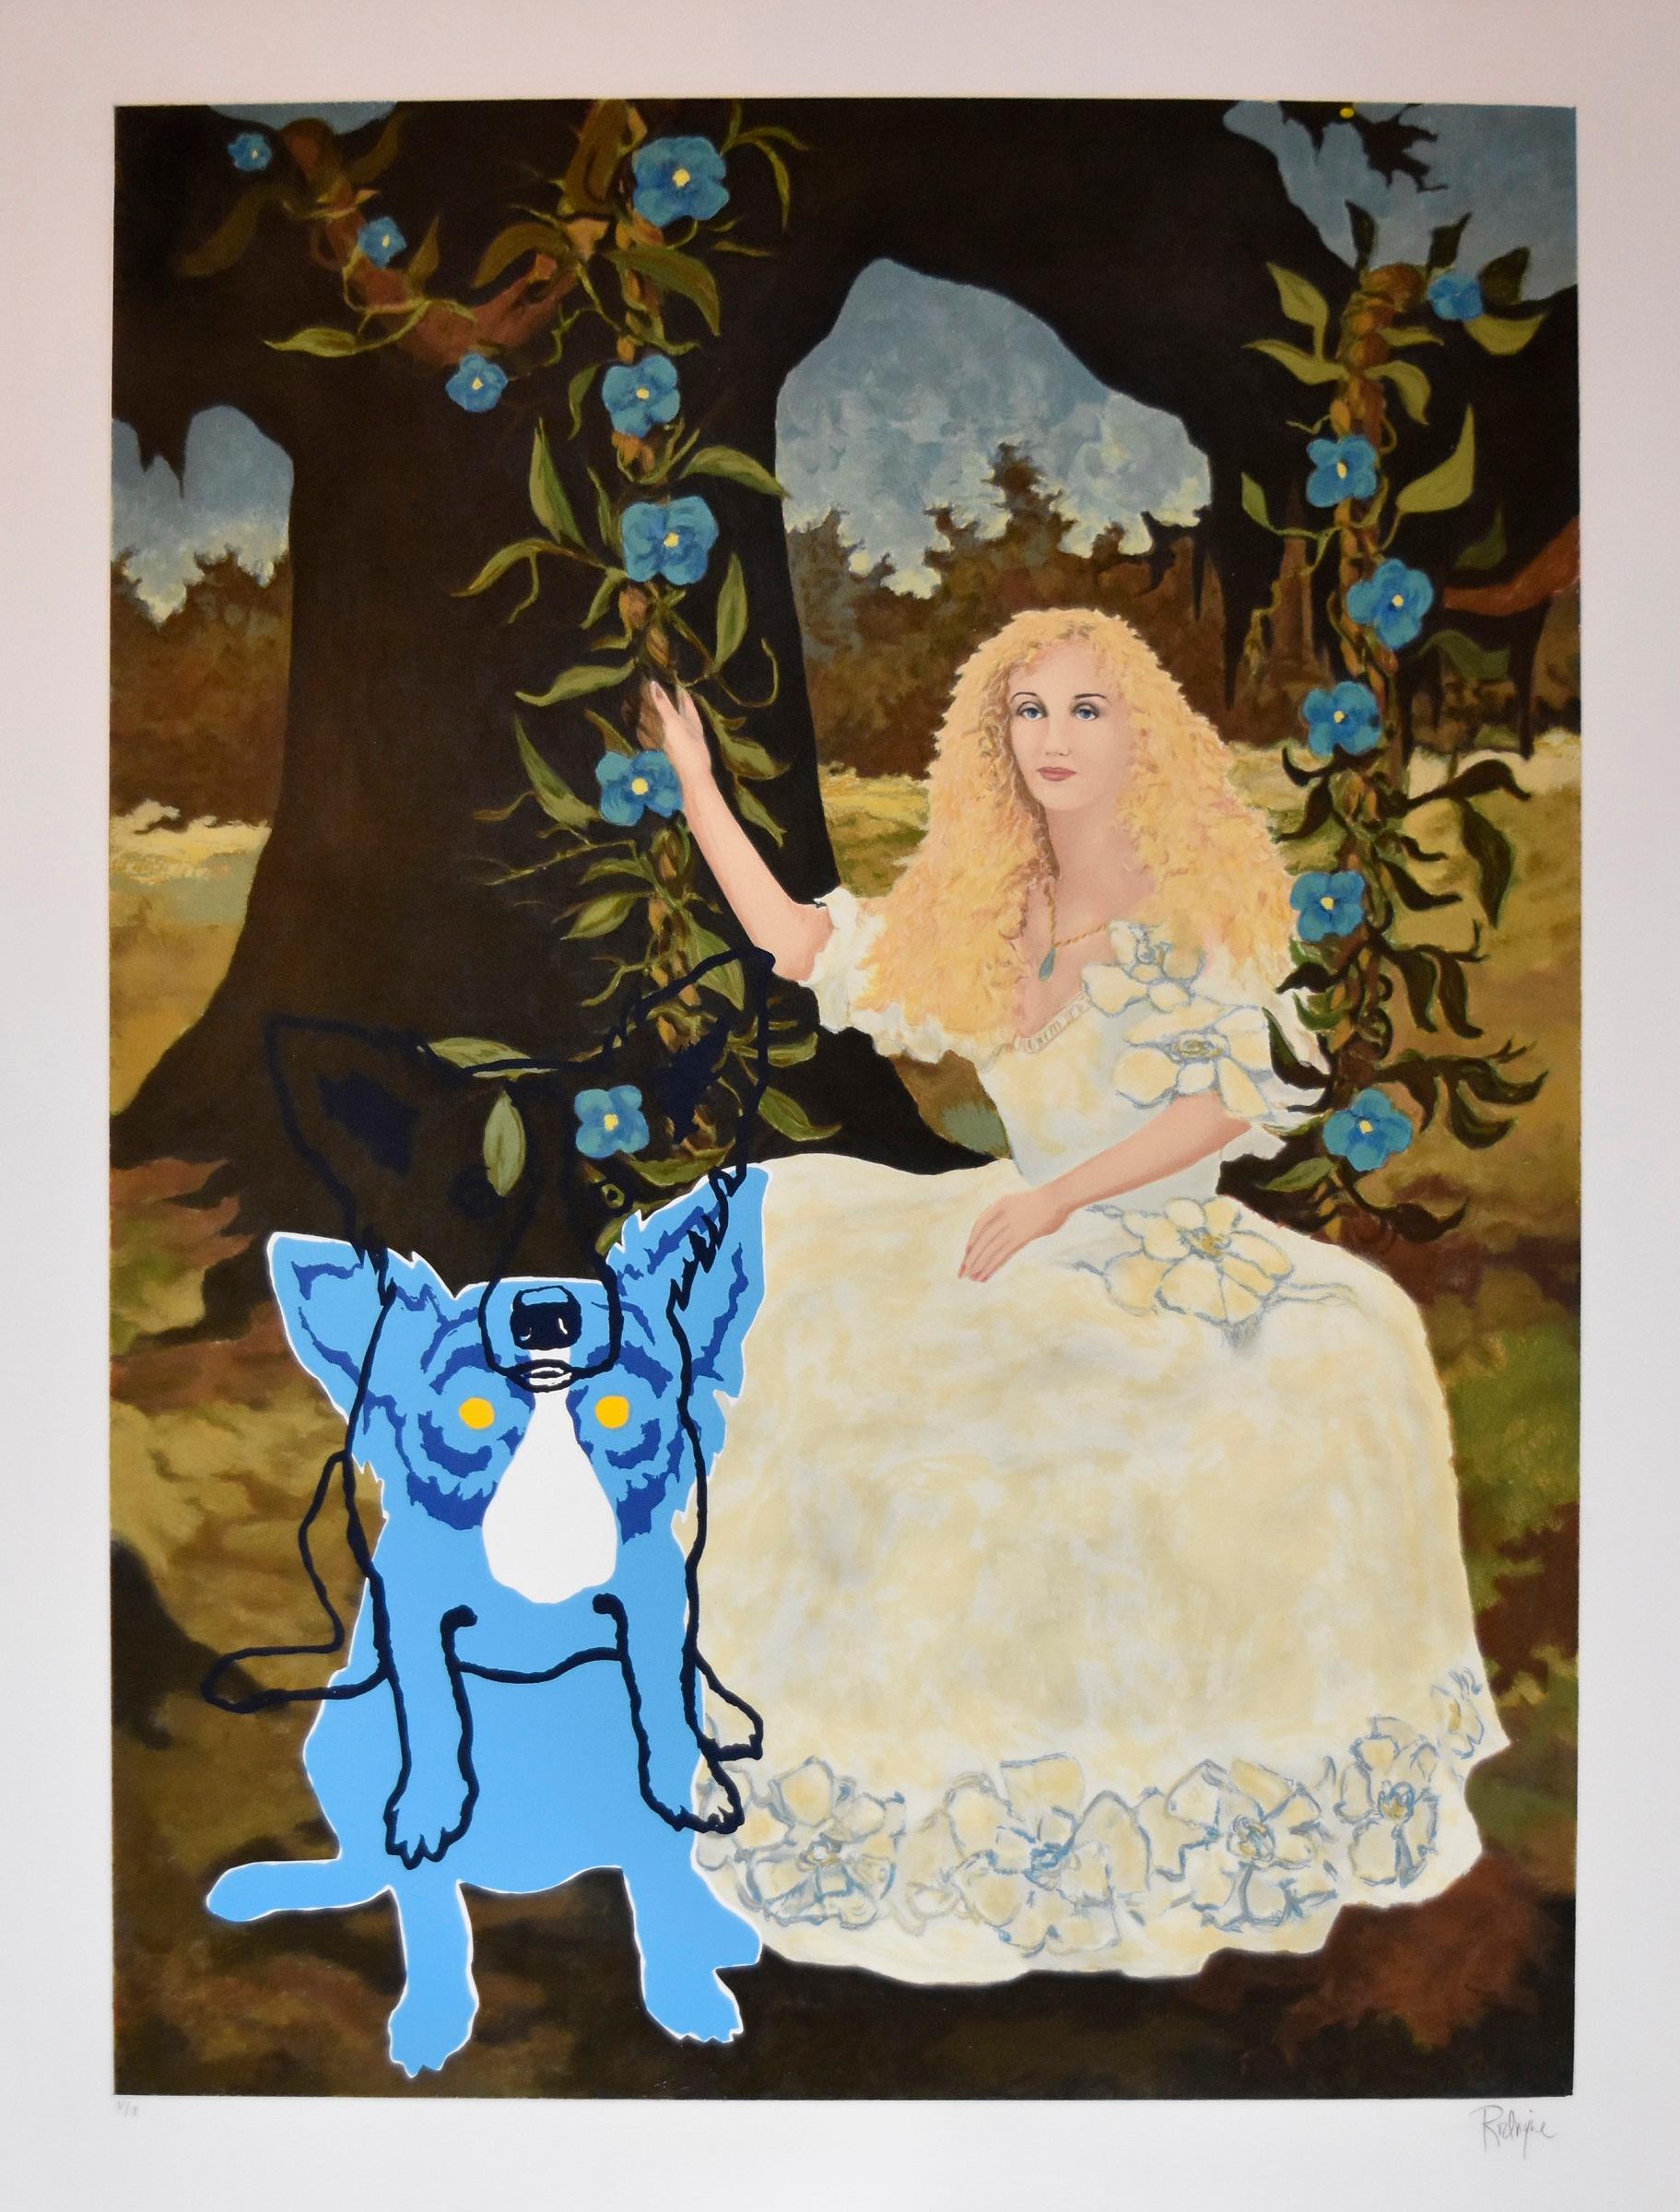 This Blue Dog work consists of a blonde female sitting on a floral swing hanging from a tree.  The female is wearing an ecru dress with flowers on the edges and sleeves matching the swing flowers. There is a single Tiffany Blue Dog (added in 1991)